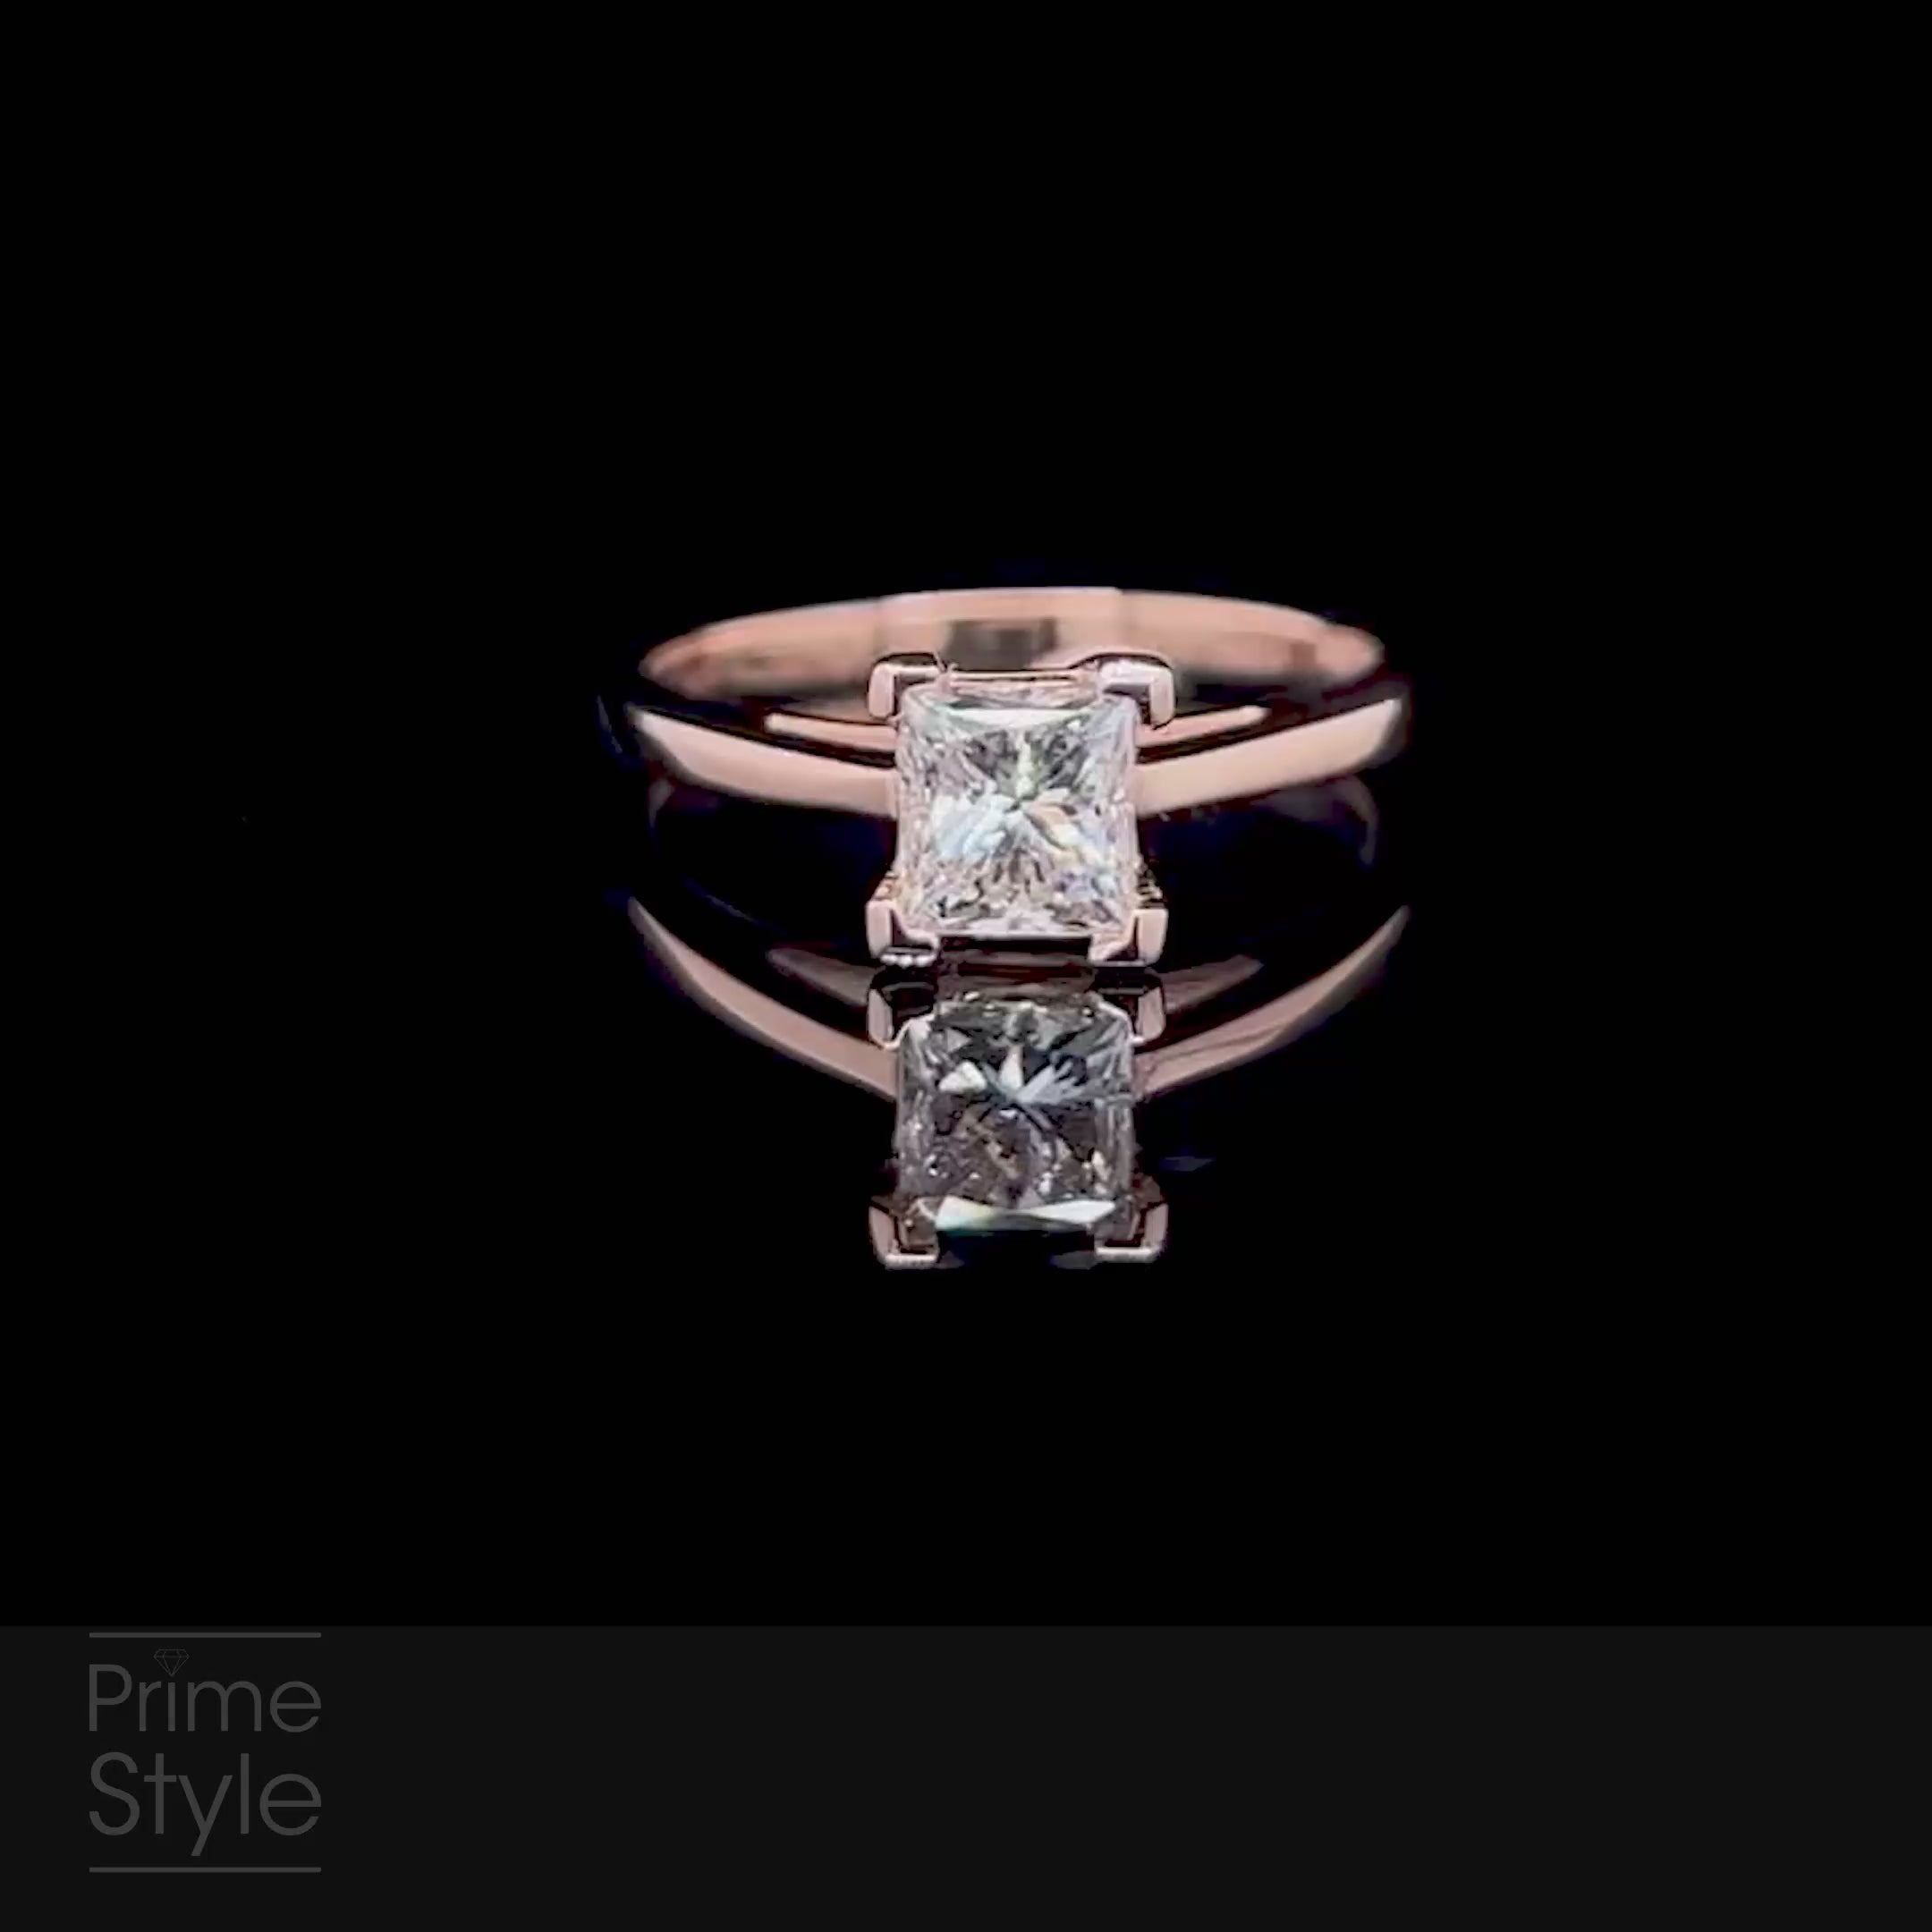 Selected 1.00CT Princess Cut Diamond Solitaire Ring in 14KT Rose Gold